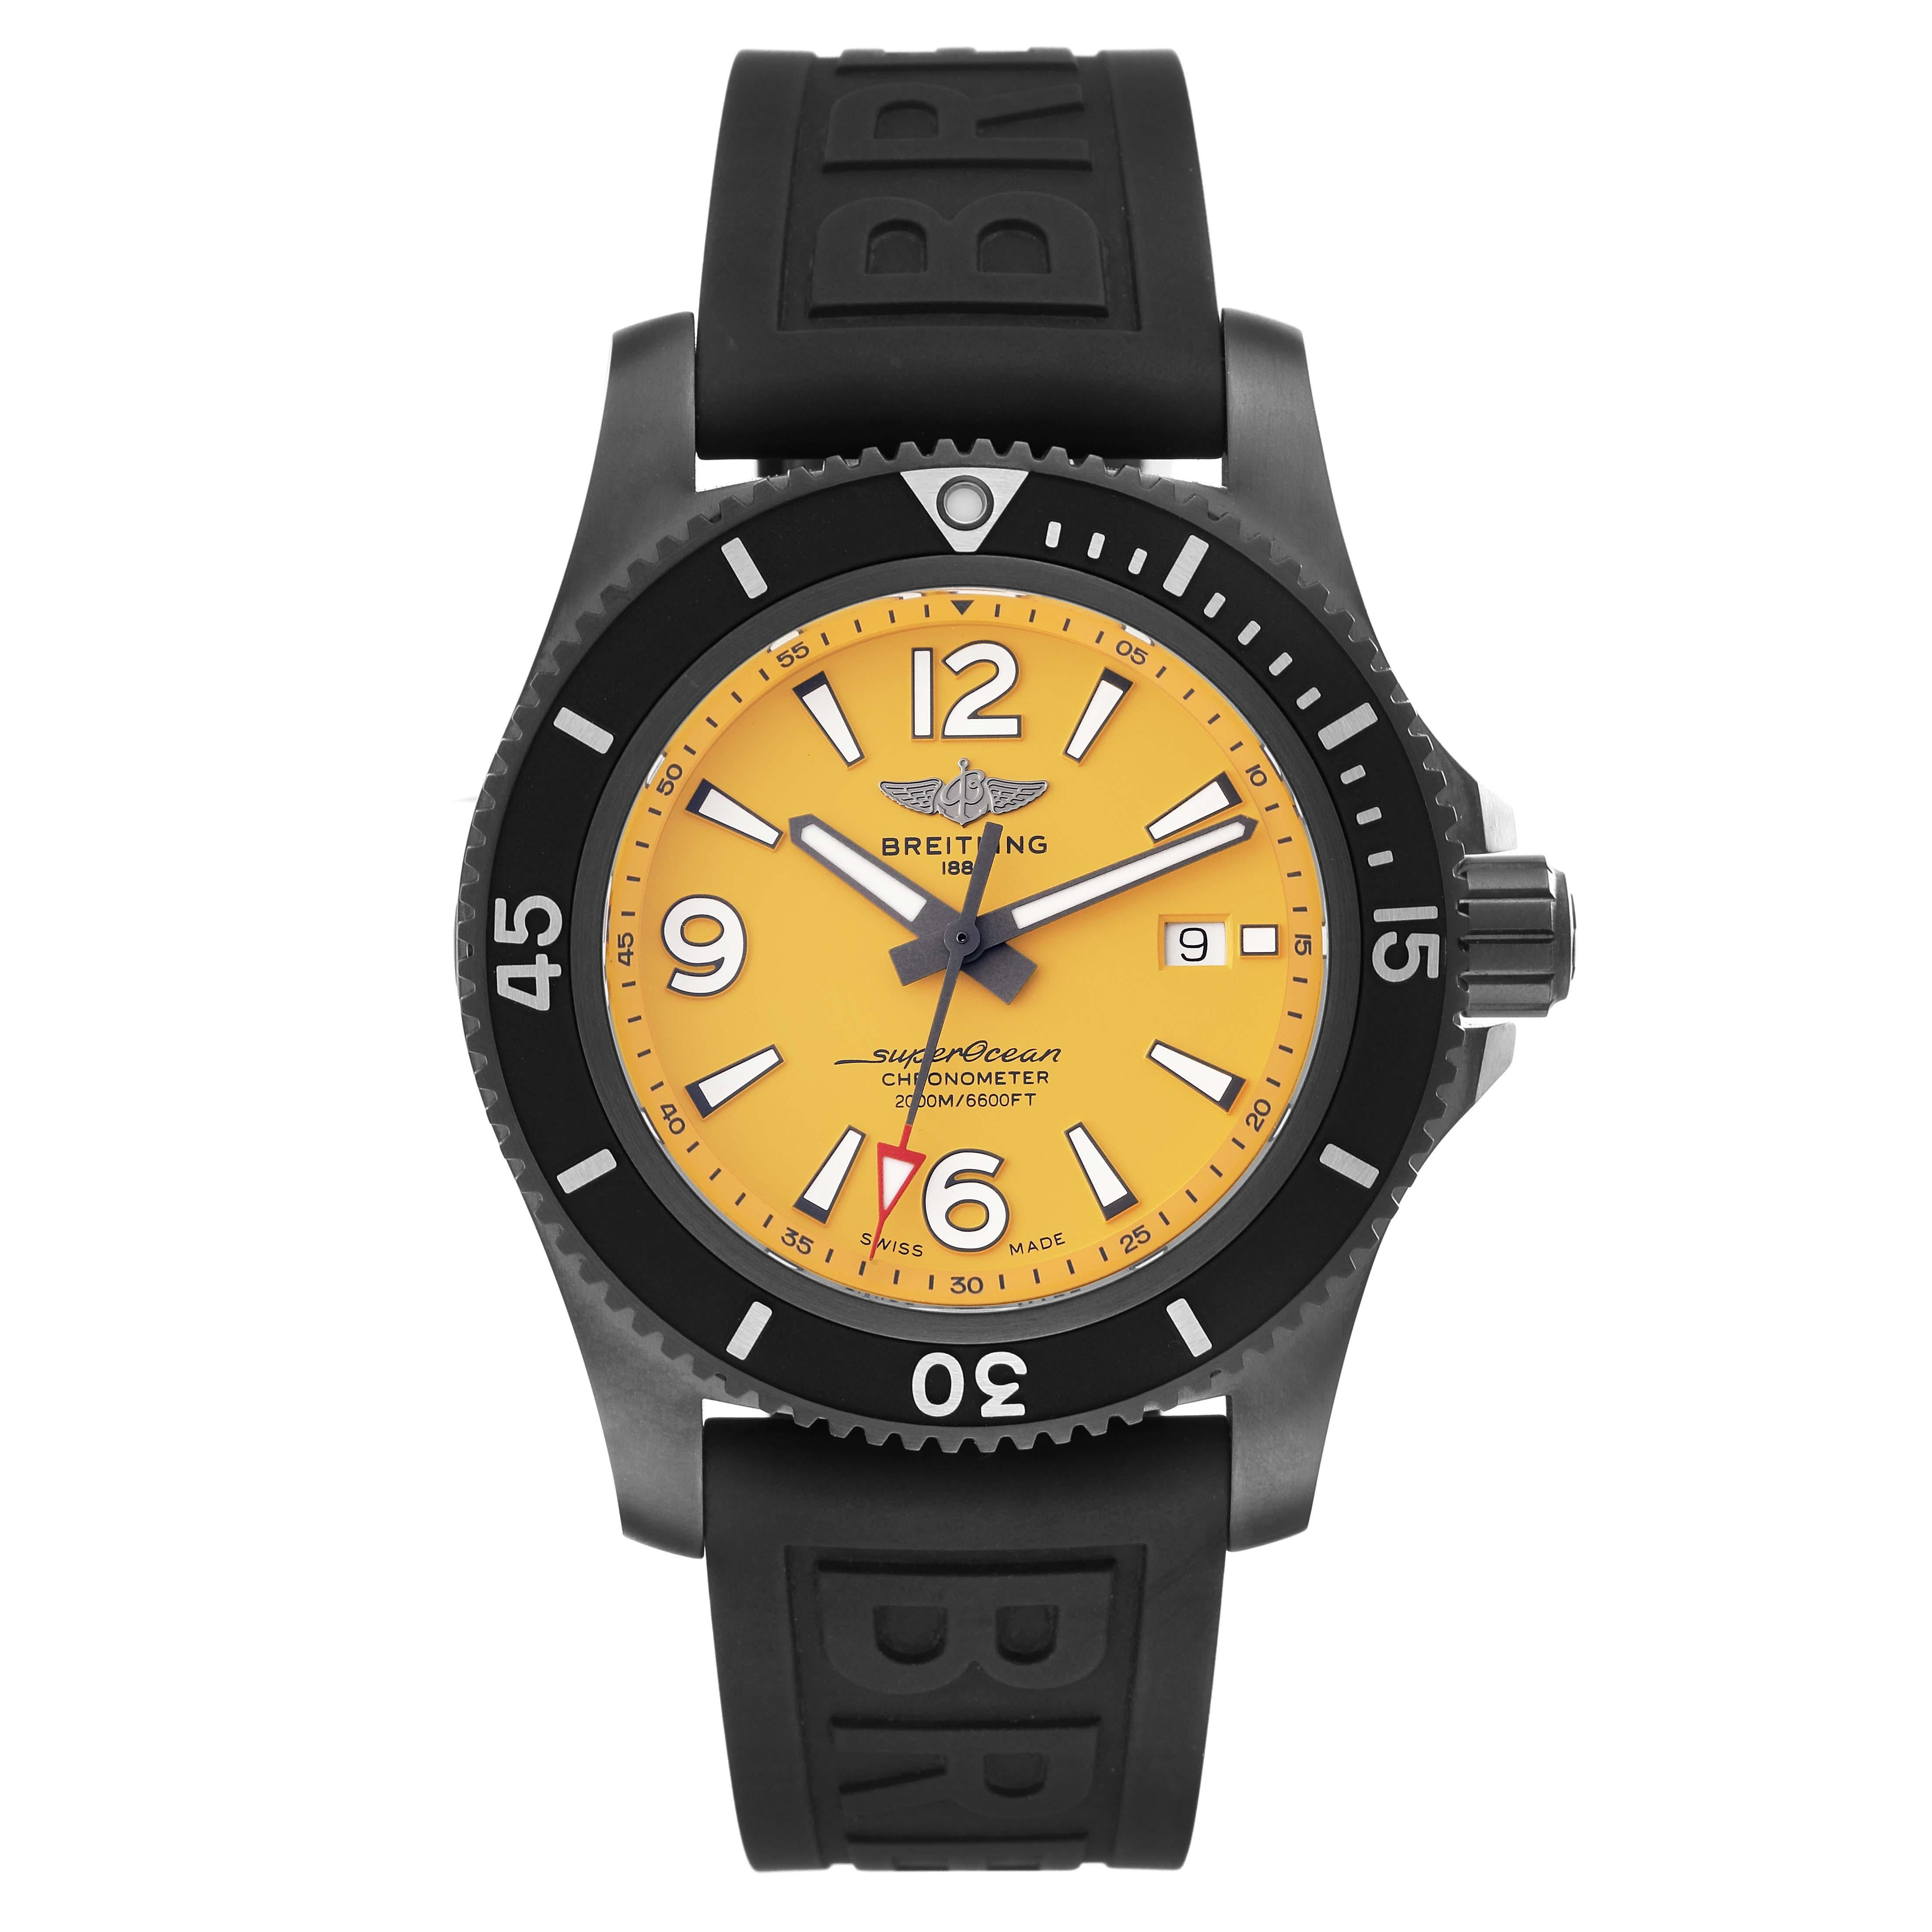 Breitling Superocean 46 Yellow Dial DLC Steel Mens Watch M17368 Unworn. Automatic self-winding movement. DLC coated stainless steel case 46.0 mm in diameter. Stainless steel screwed-down crown. Black DLC coated stainless steel unidirectional